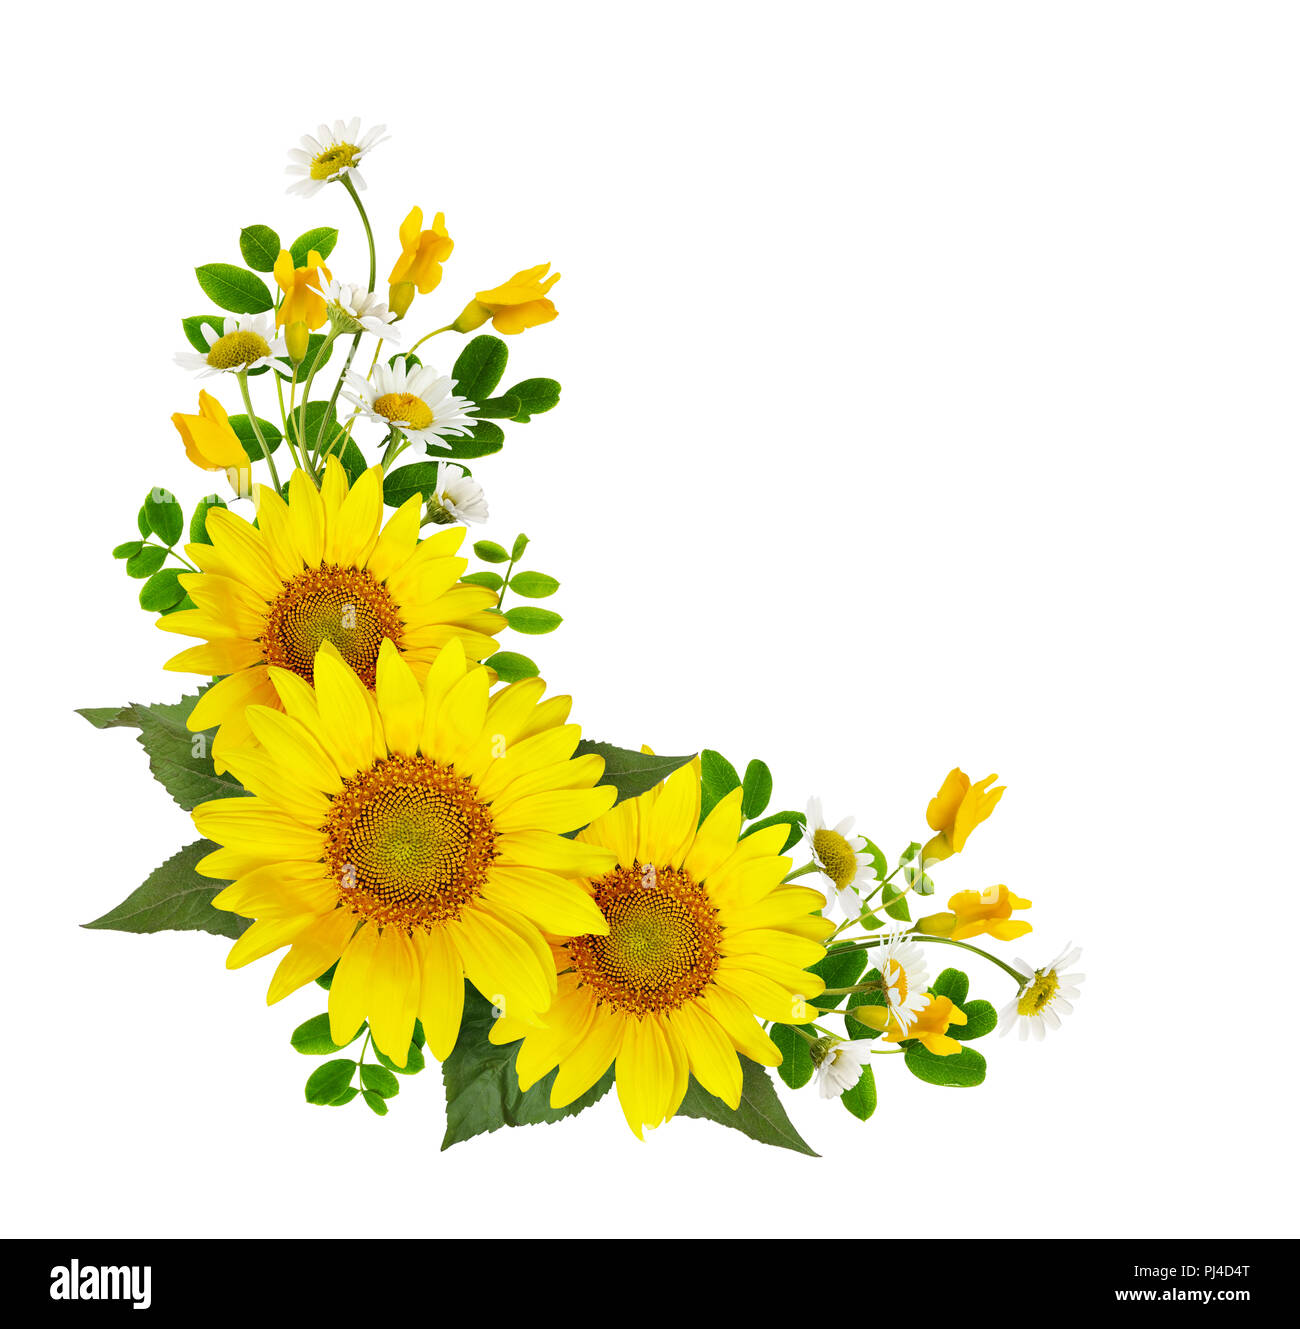 Sunflowers, daisies and acacia flowers and green leaves in a corner arramgement isolated on white background. Flat lay. Top view. Stock Photo